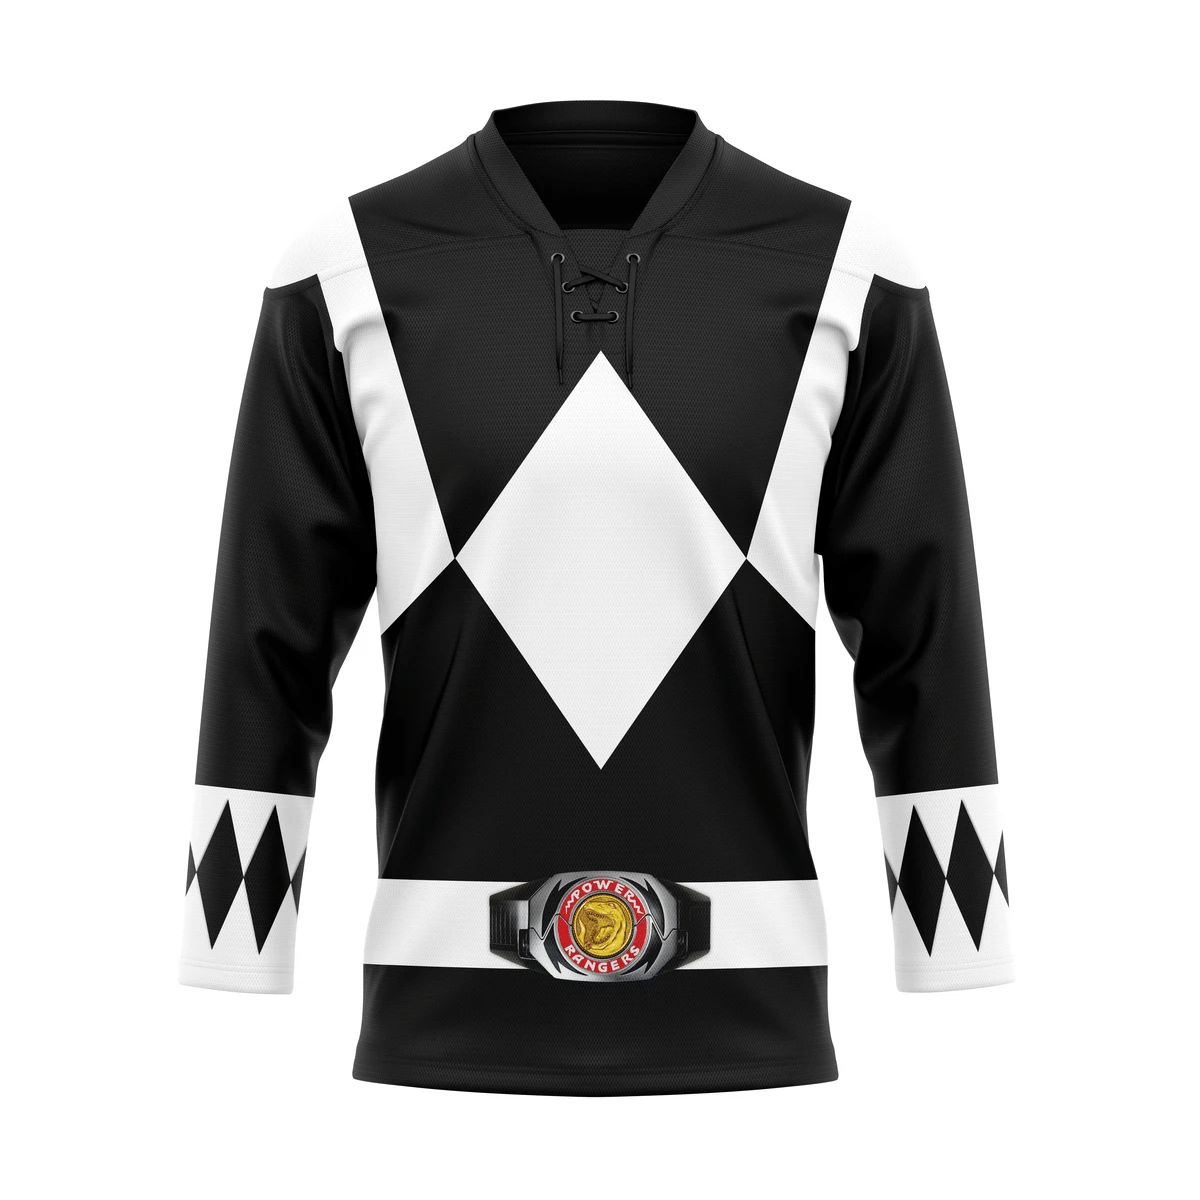 The style of a hockey jersey should match your personality. 149